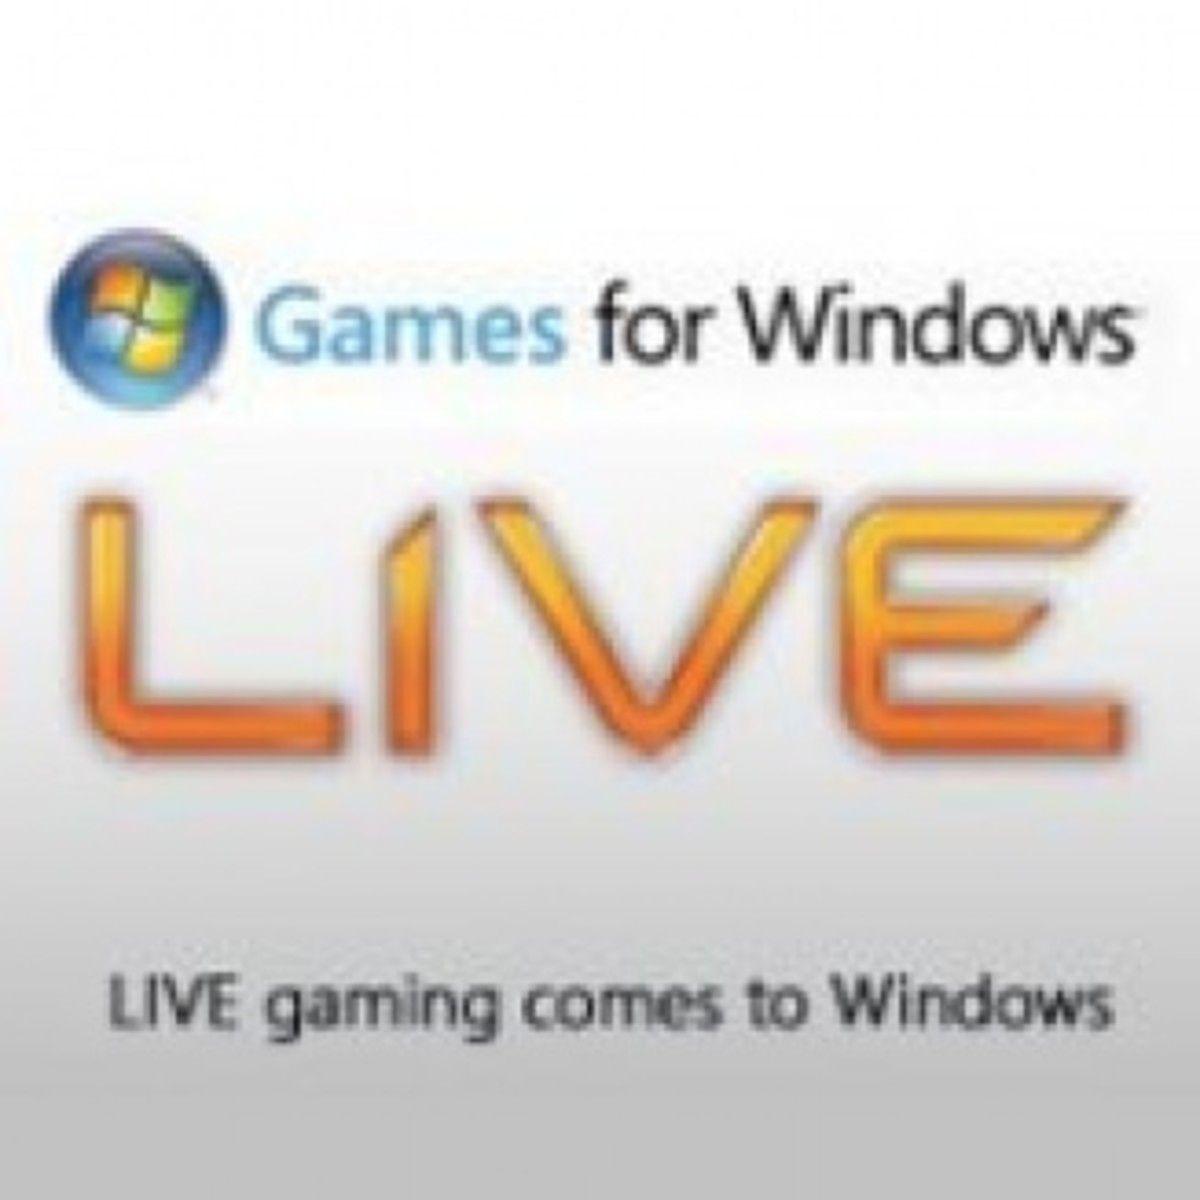 Games for Windows Live Logo - Microsoft cans games for Windows Live Marketplace